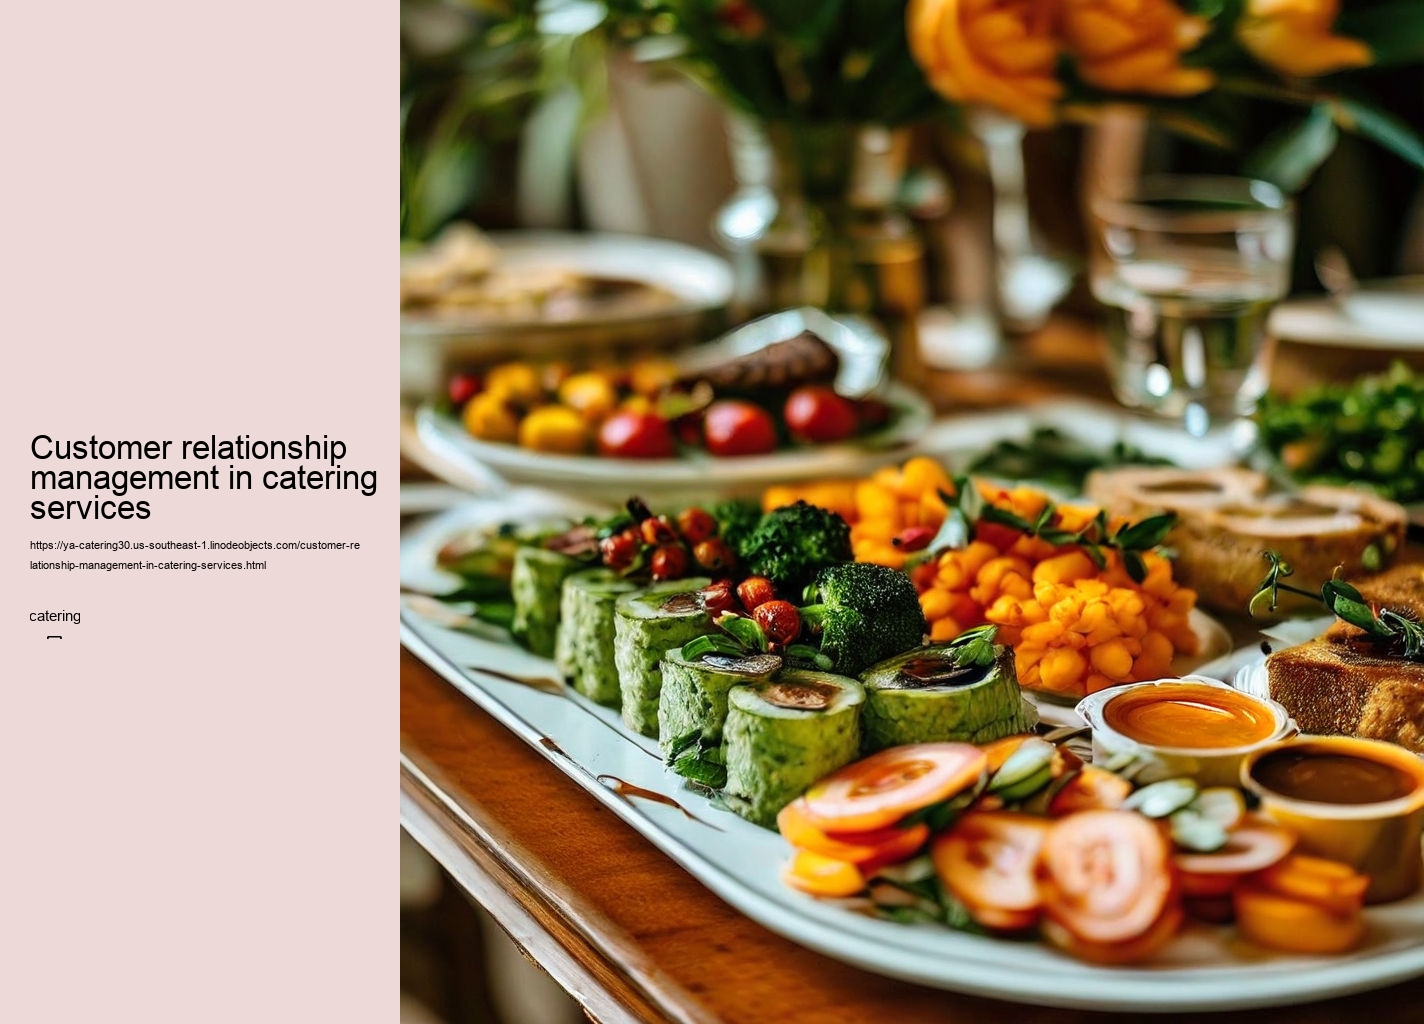 Customer relationship management in catering services